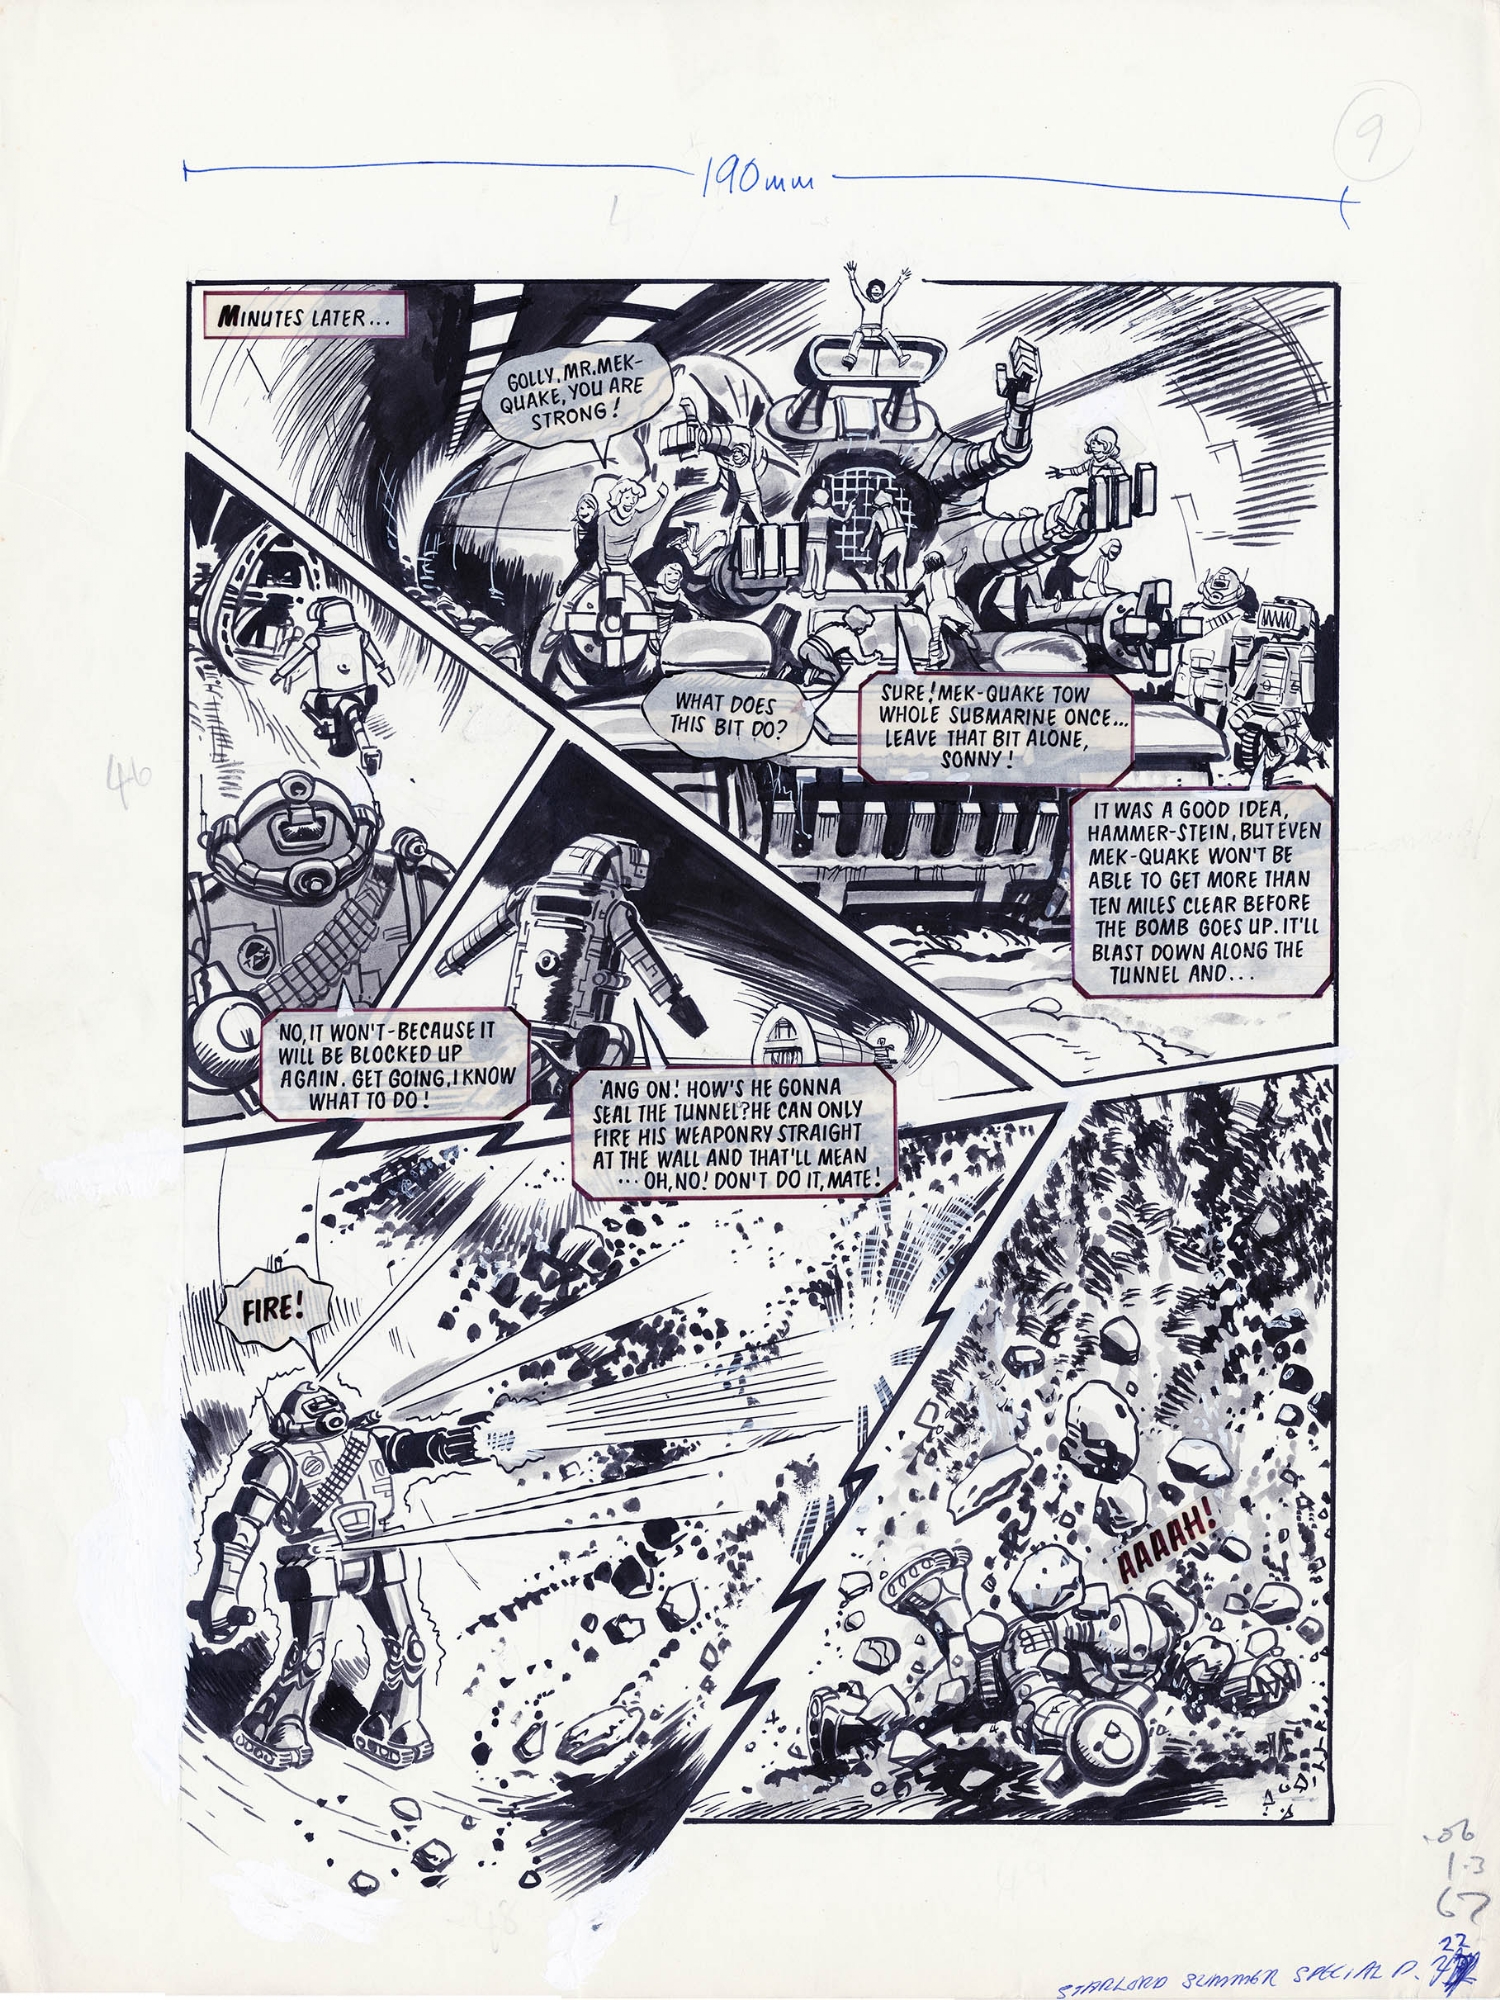 Robusters Starlord Summer Special 1978 Page 9 Geoff Campion